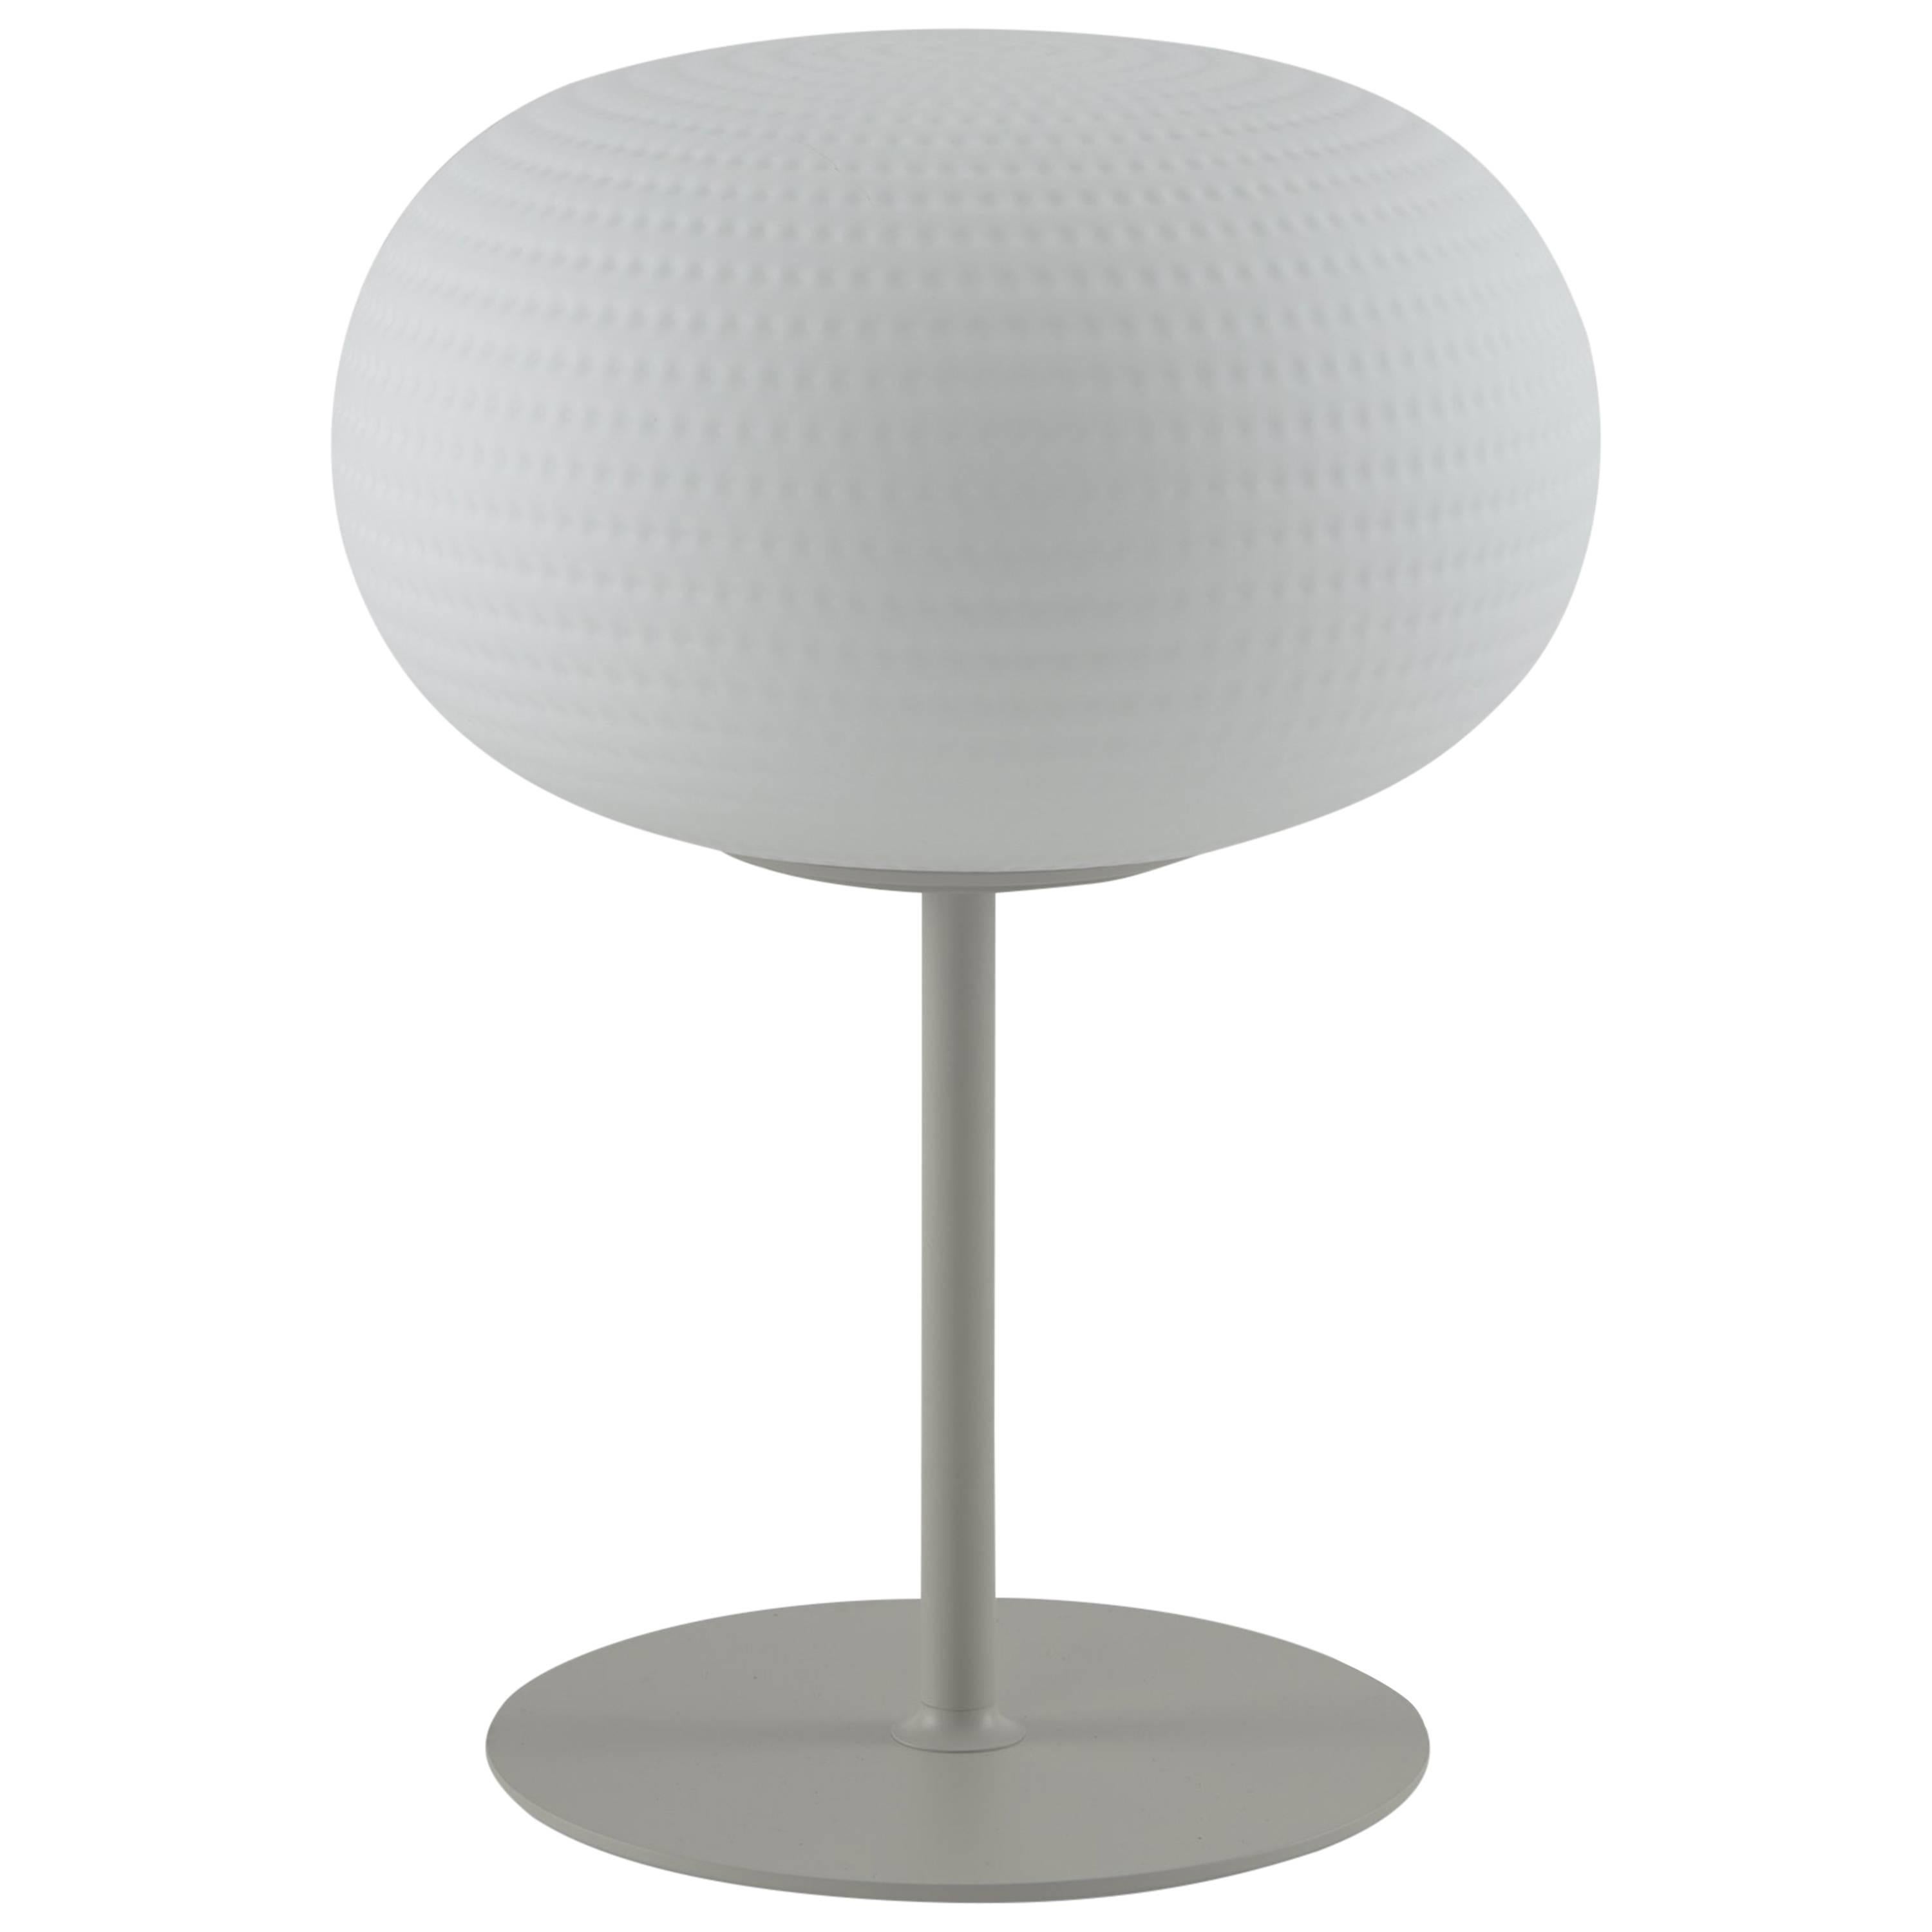 Bianca Medium Table Lamp with Stem by Matti Klenell from Fontana Arte